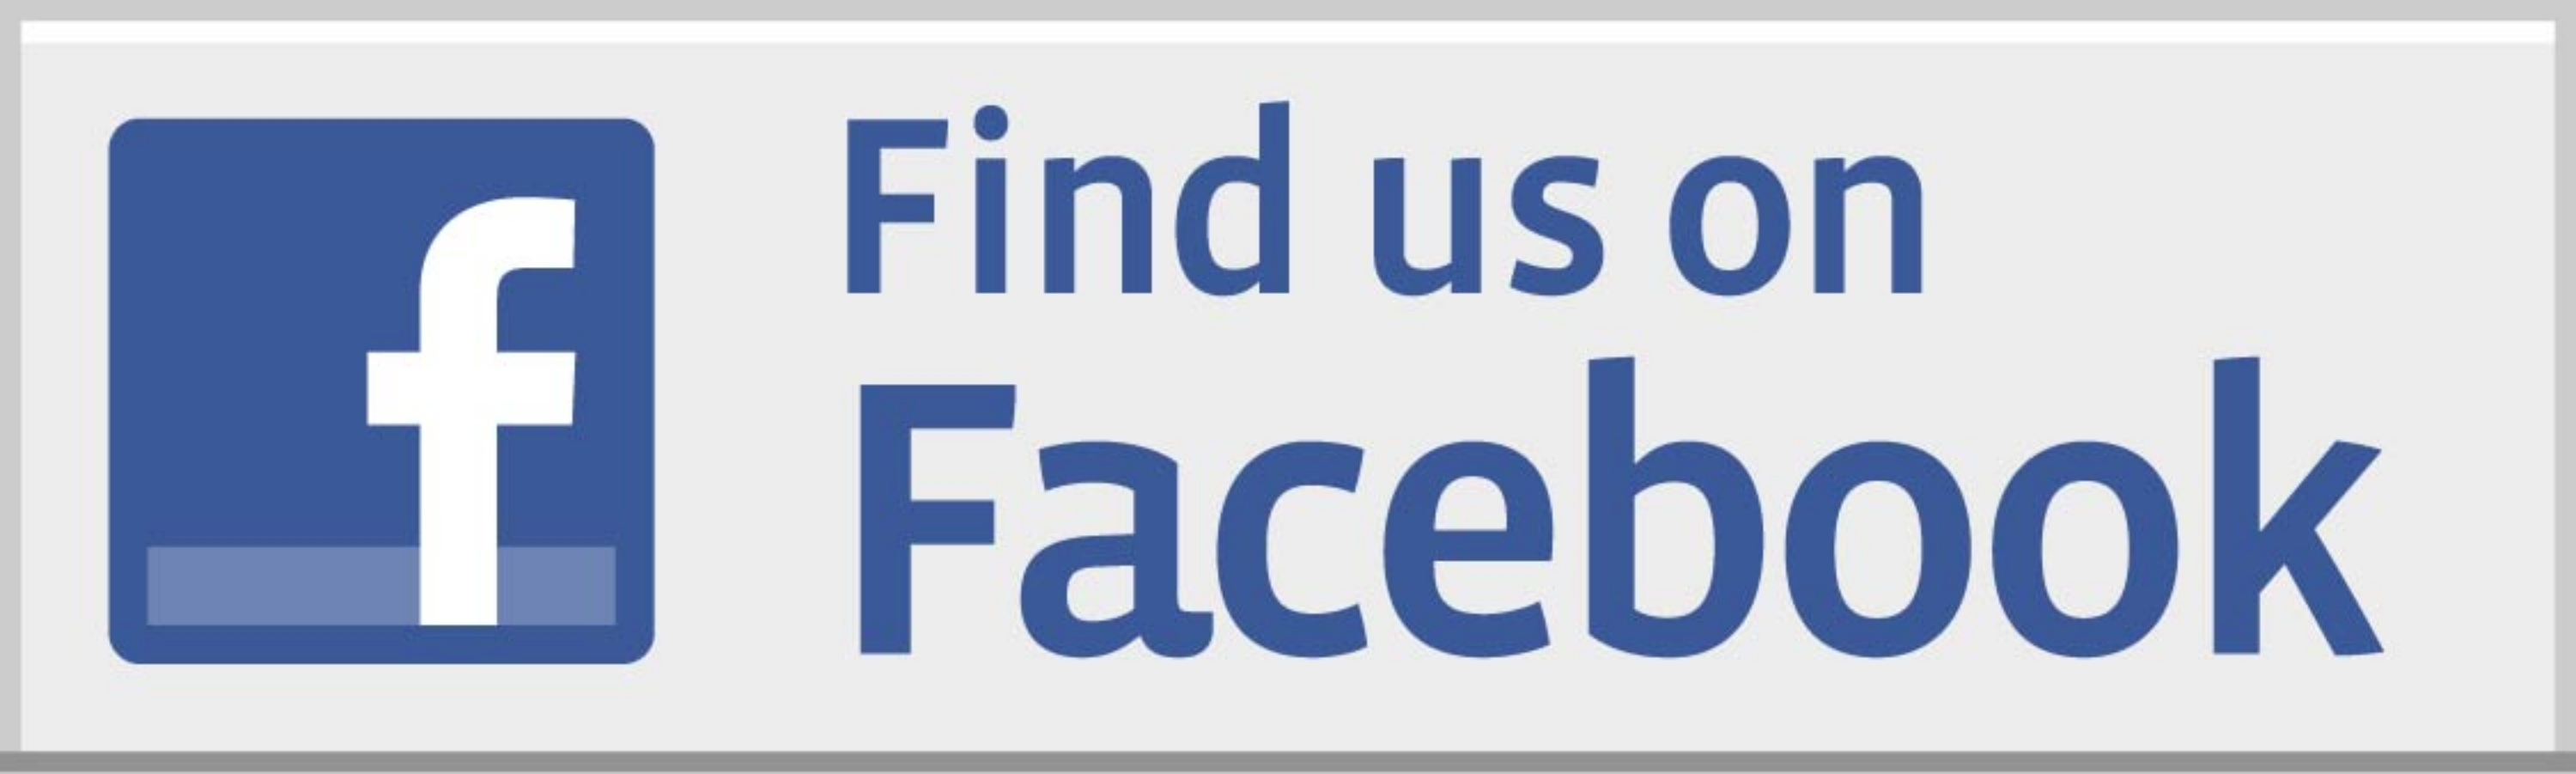 go to our Facebook page